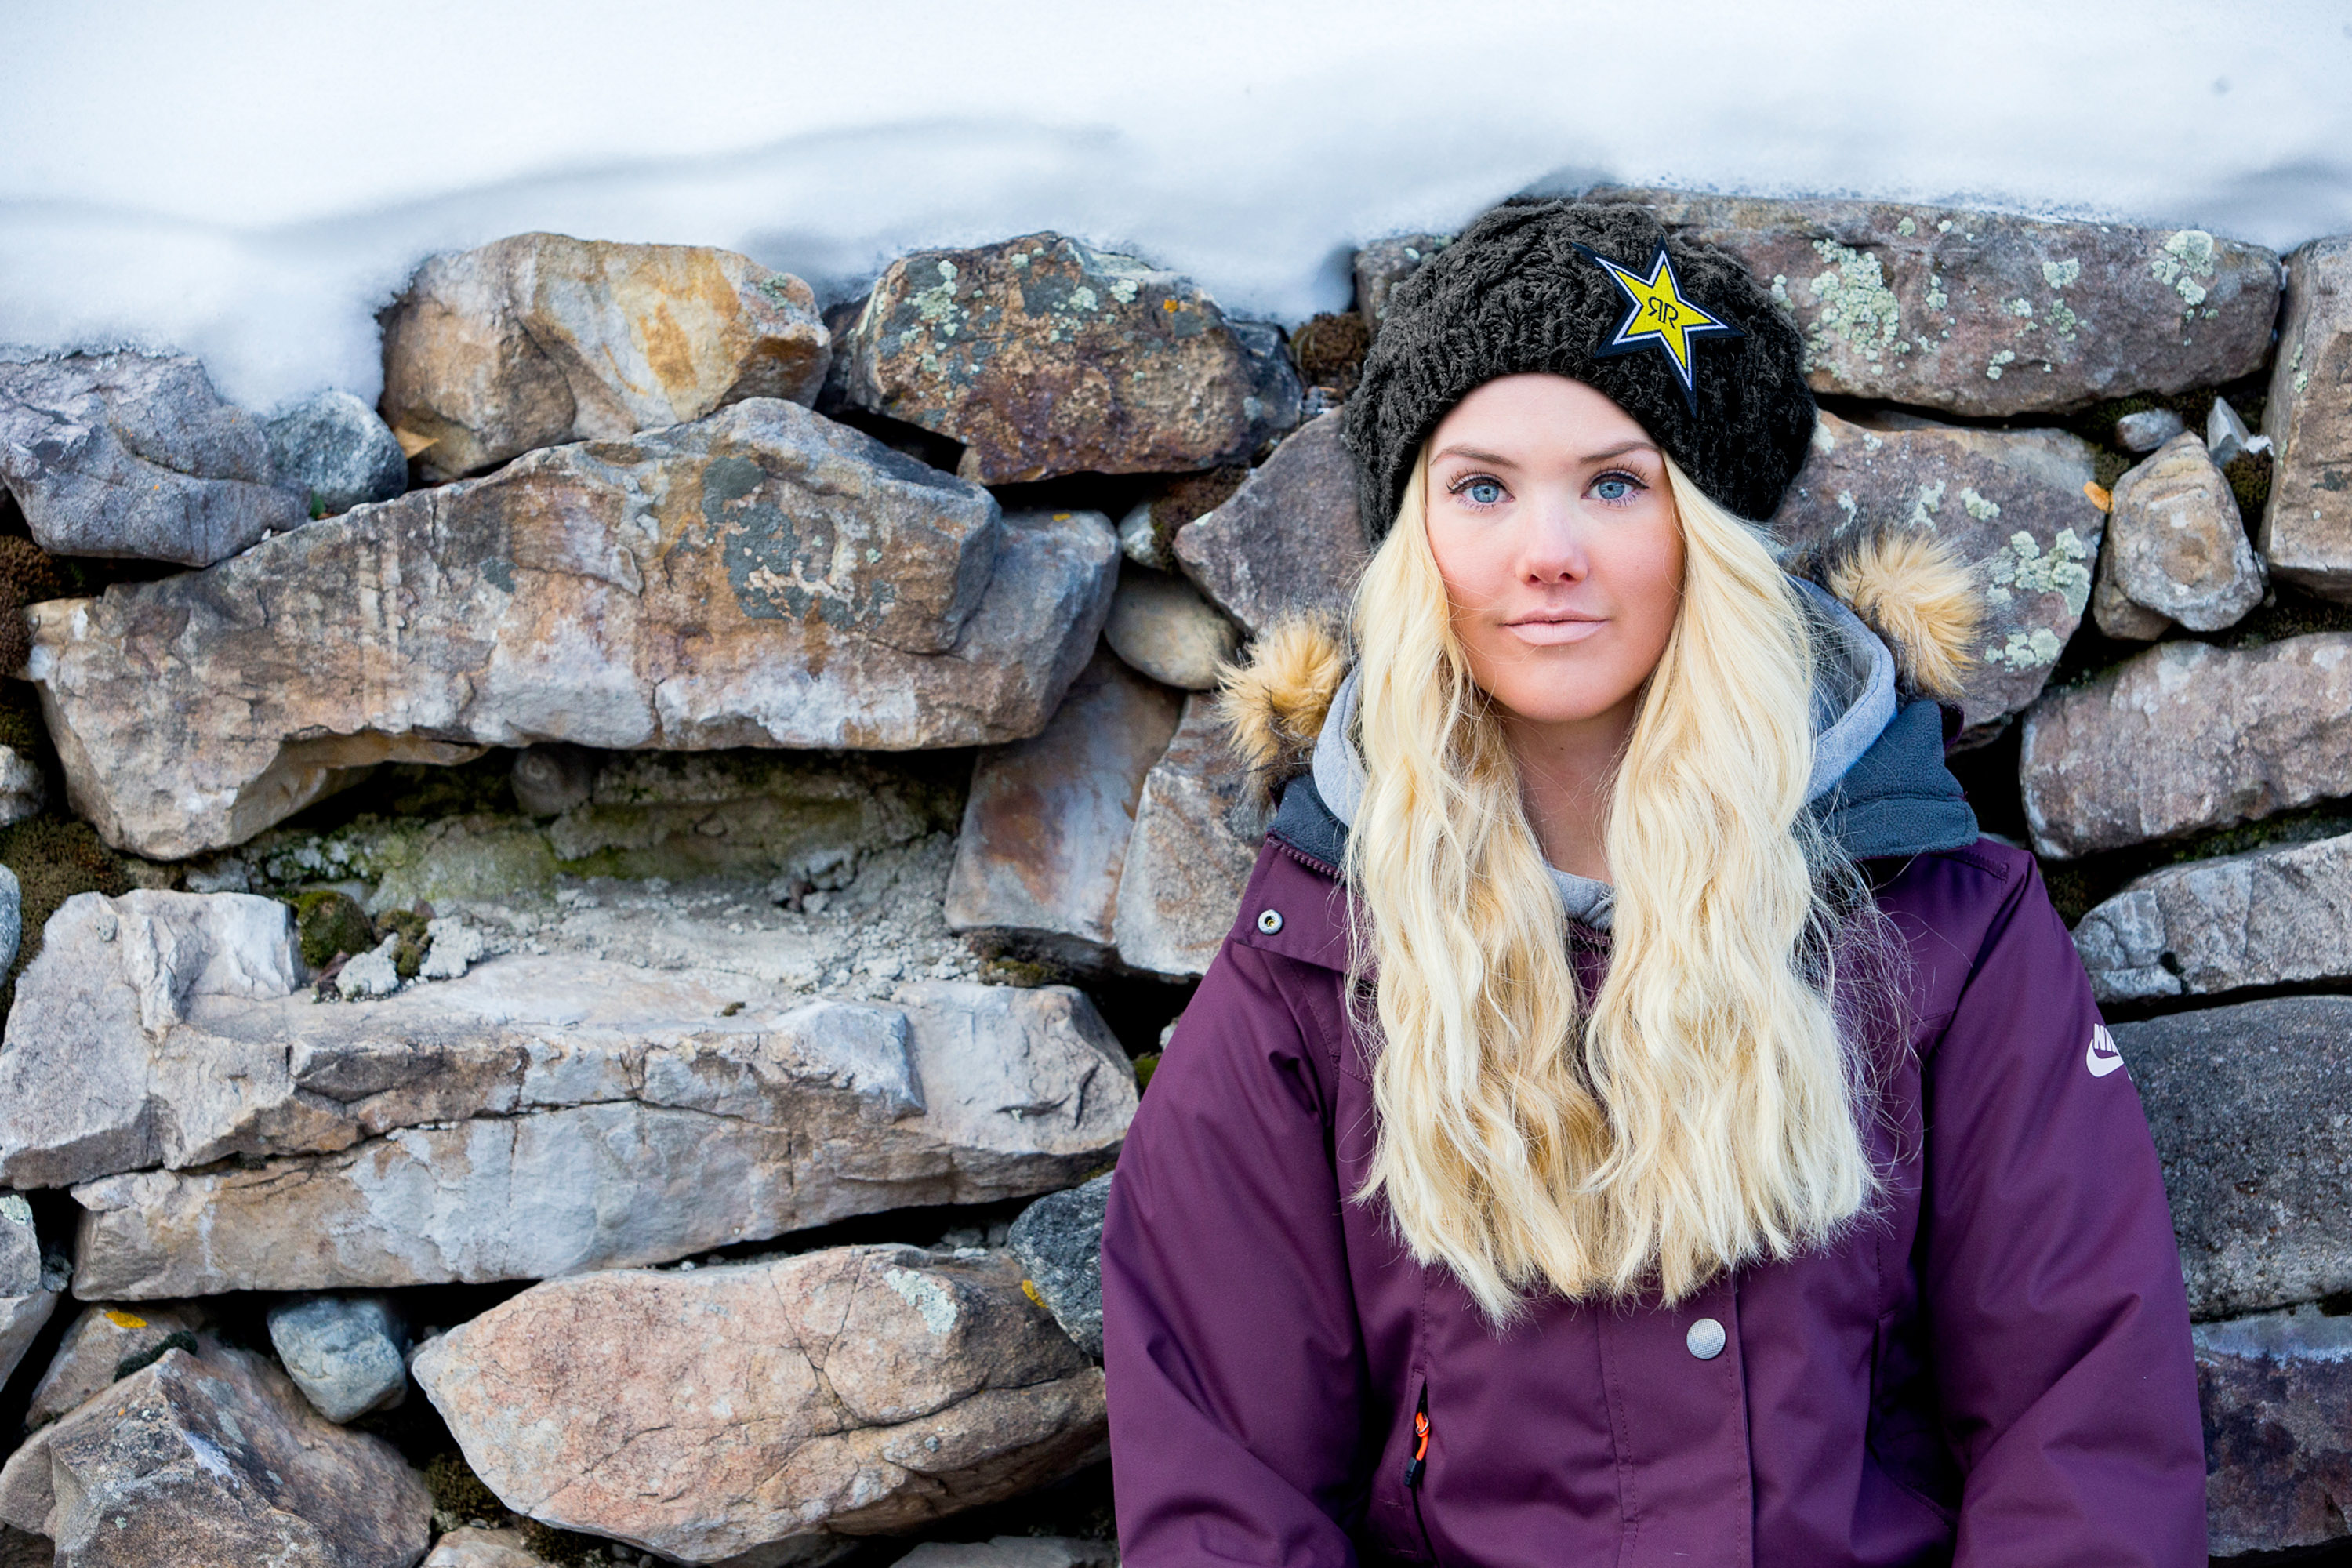 75+ Hot Pictures Of Silje Norendal will drive you nuts for her | Best Of Comic Books